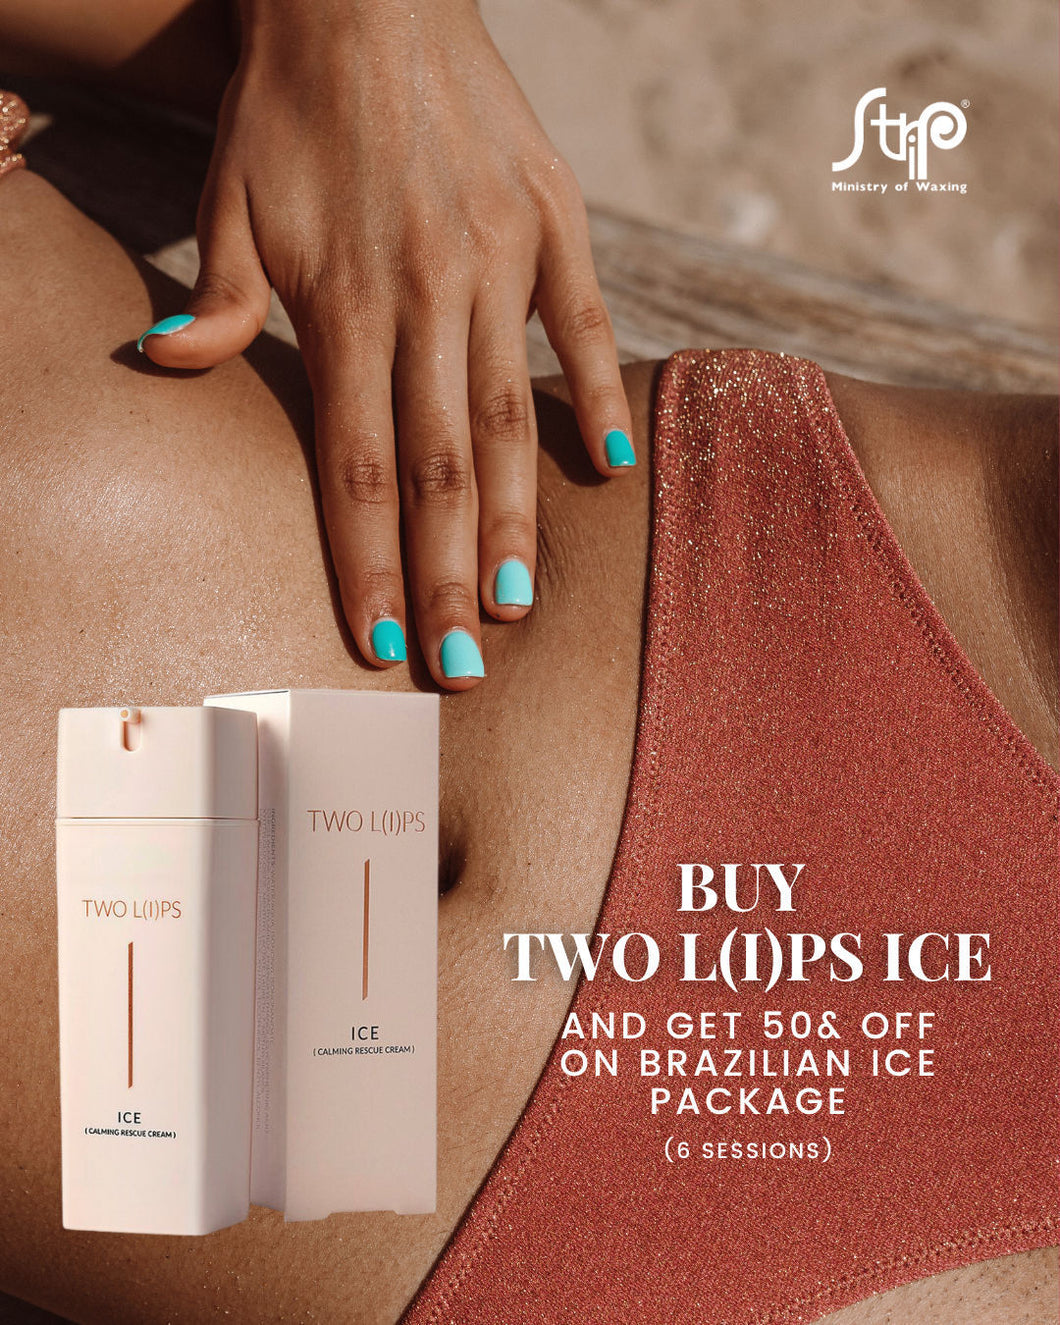 ICE DUO - Brazilian Ice Package with Two L(i)ps Ice Bundle